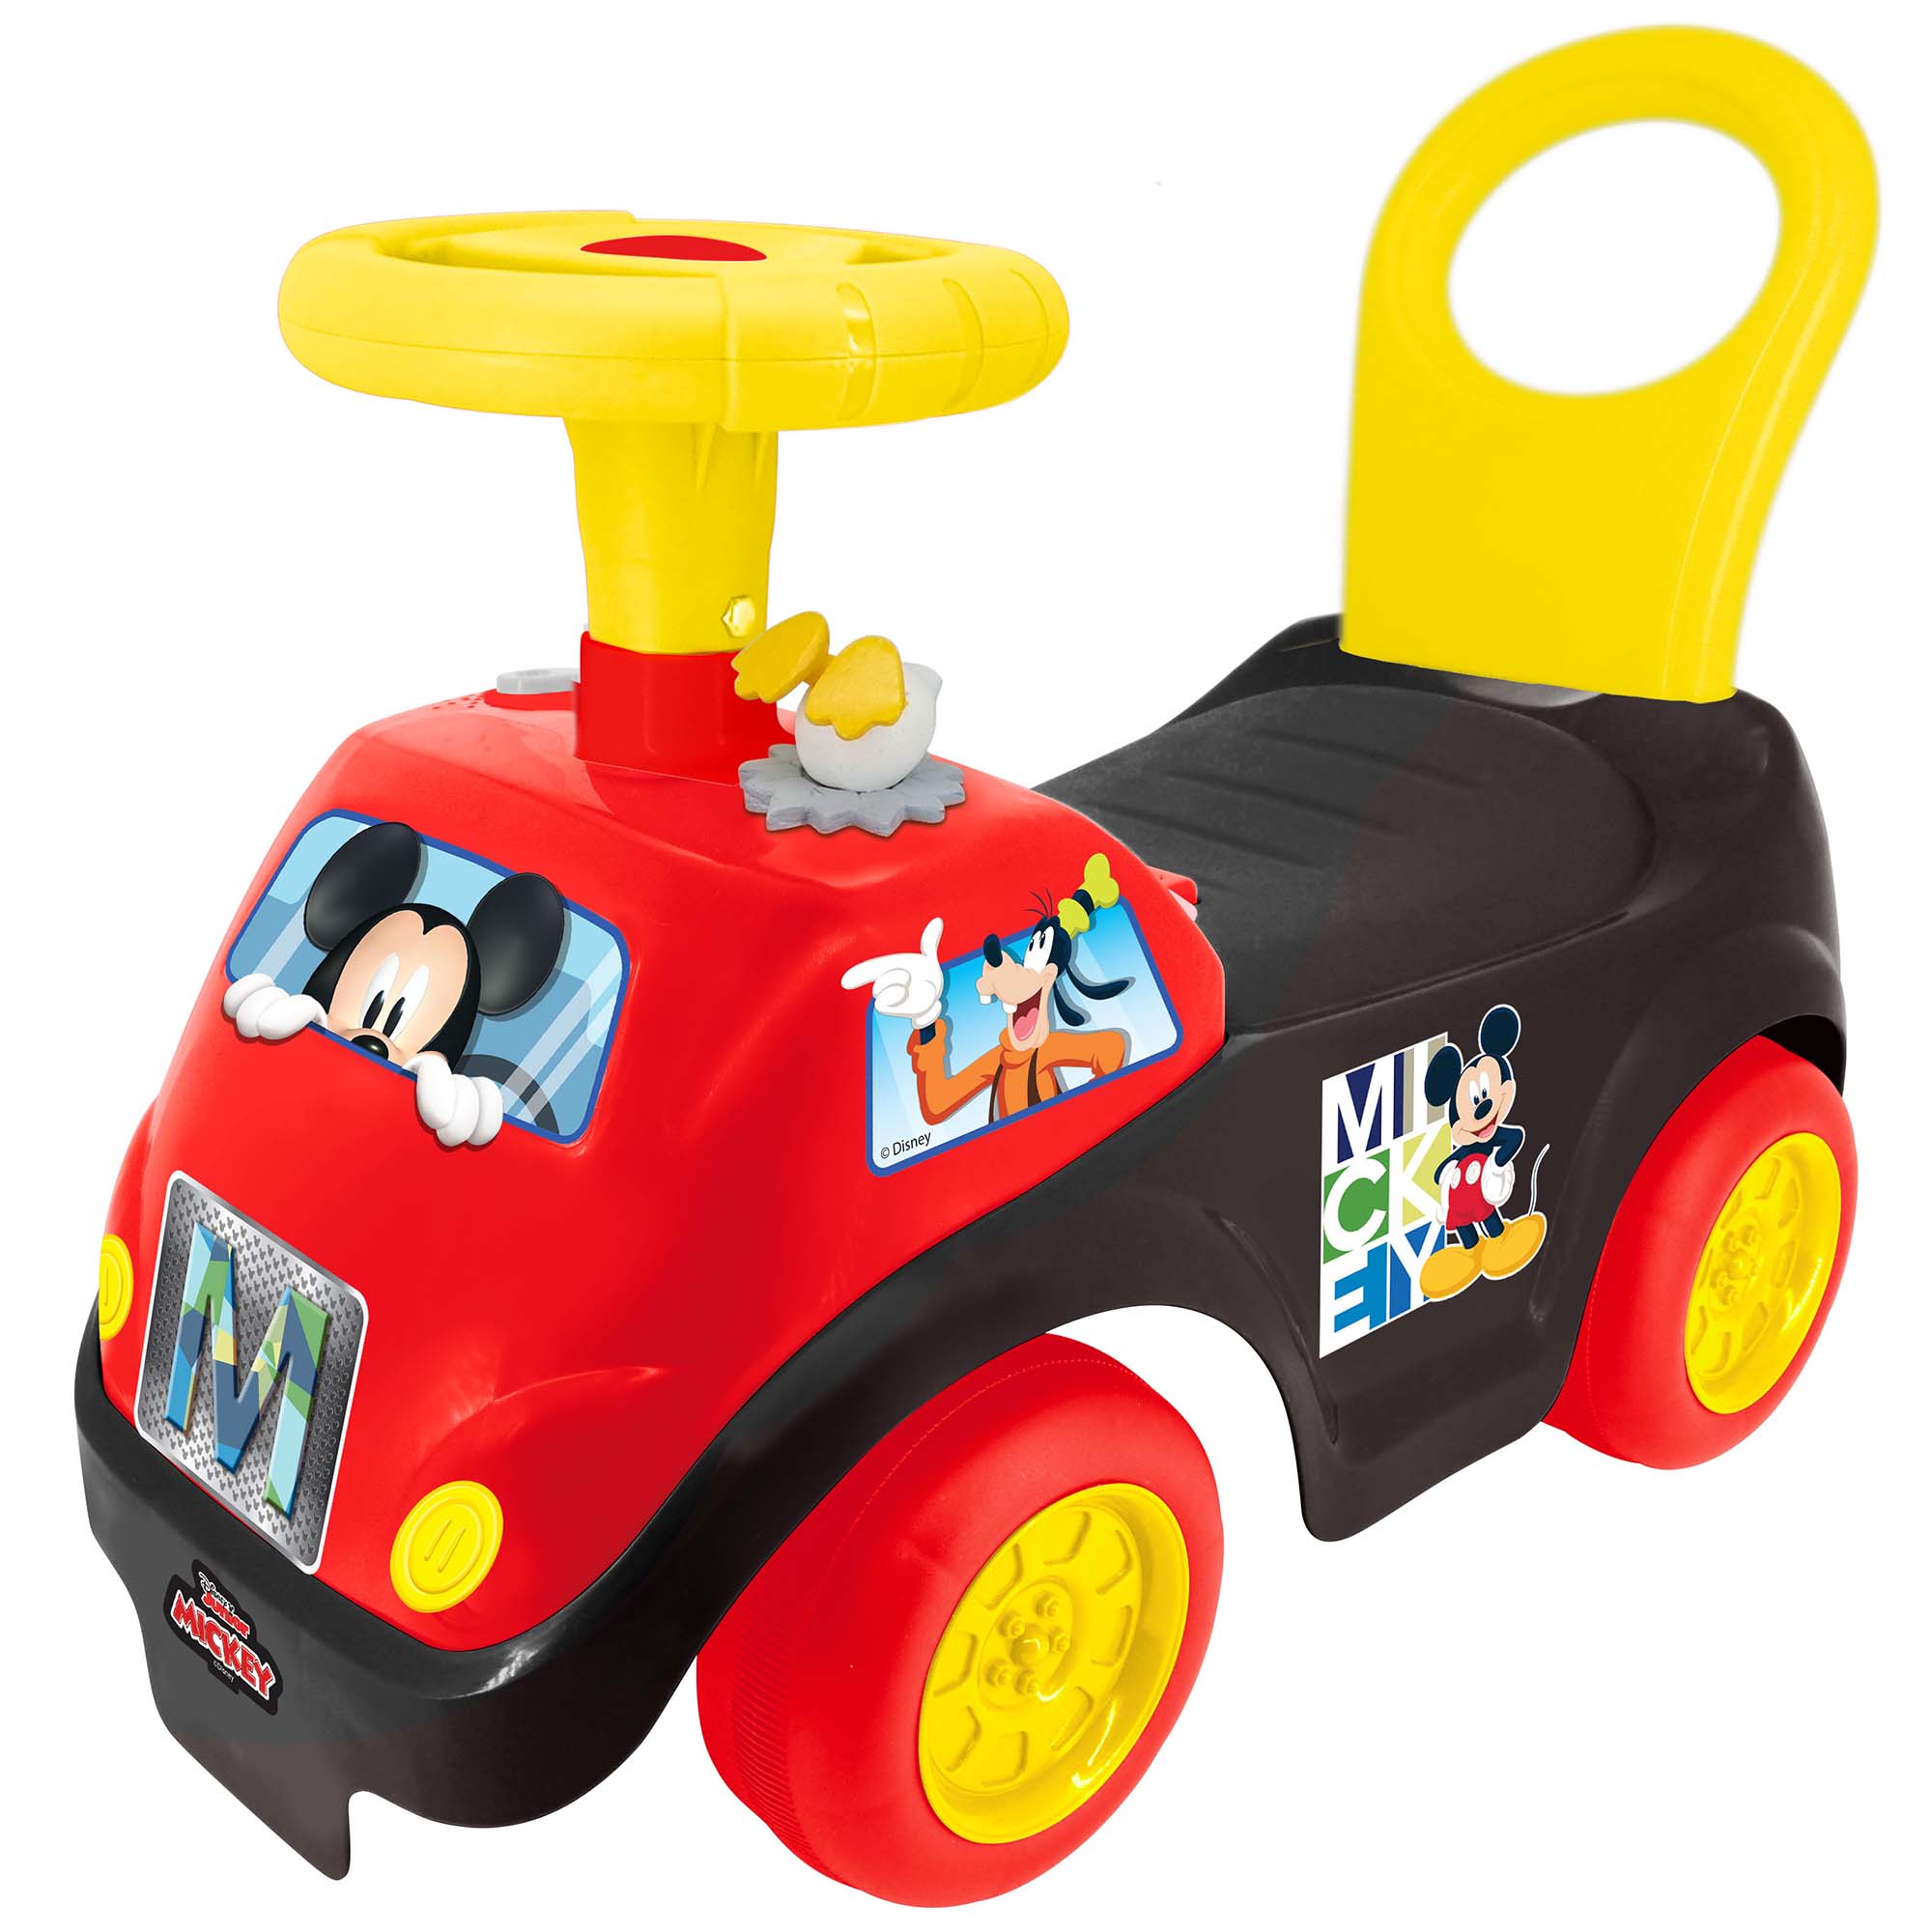 Kiddieland Disney Lights 'N' Sounds Ride-On: Mickey Mouse Kids Interactive Push Toy Car, Foot To Floor, Toddlers, Ages 12-36 Months - image 1 of 5